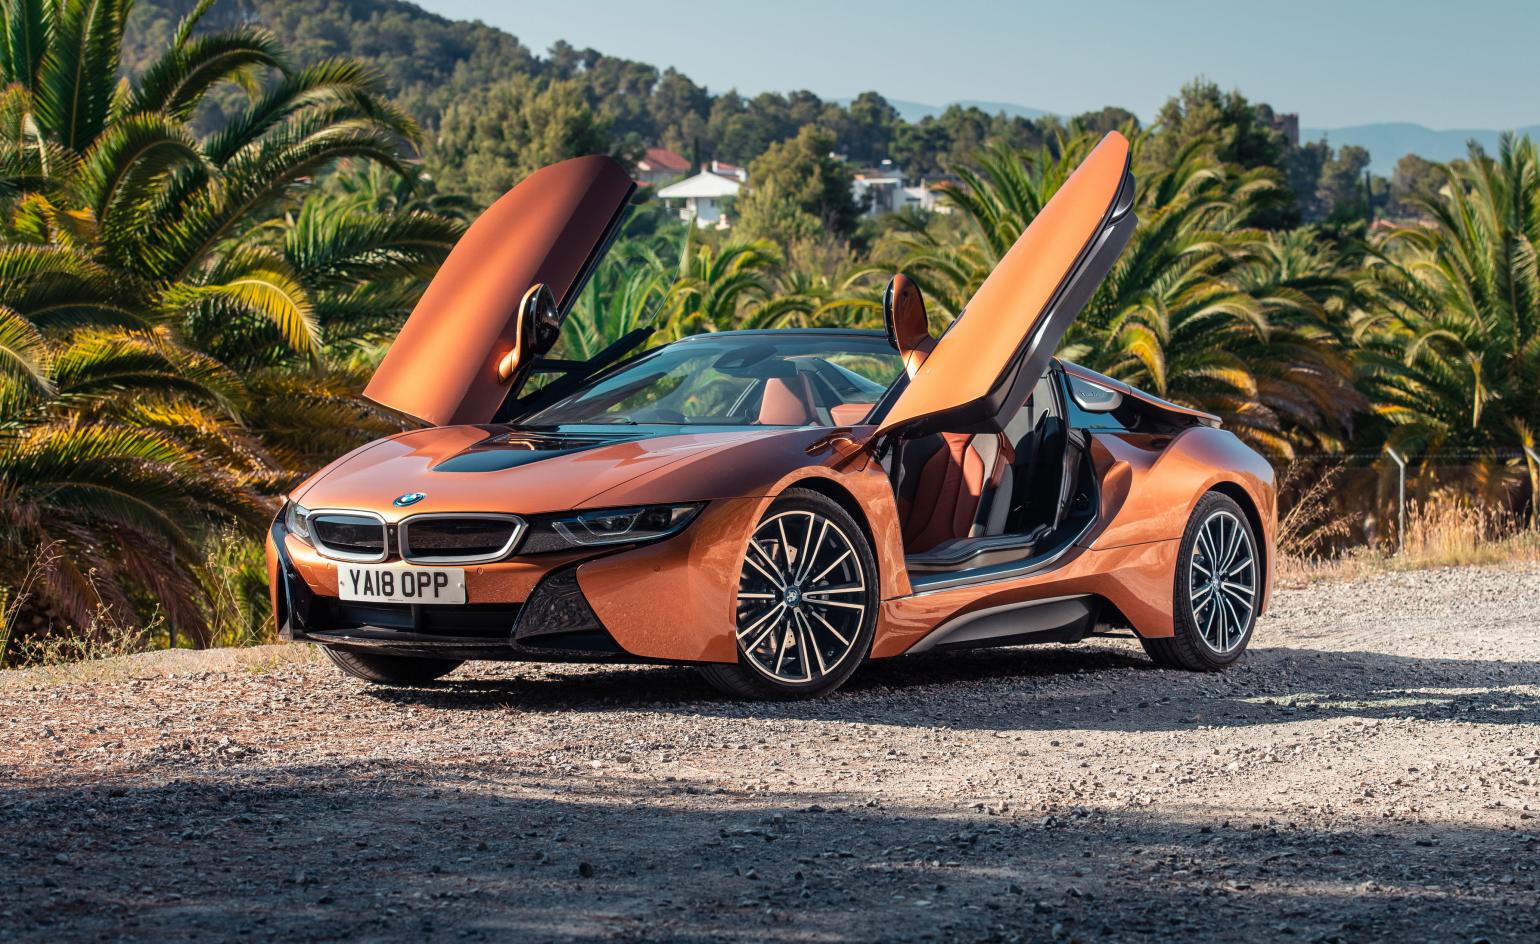 BMW i8 Roadster review and test drive 2018. Wallpaper*